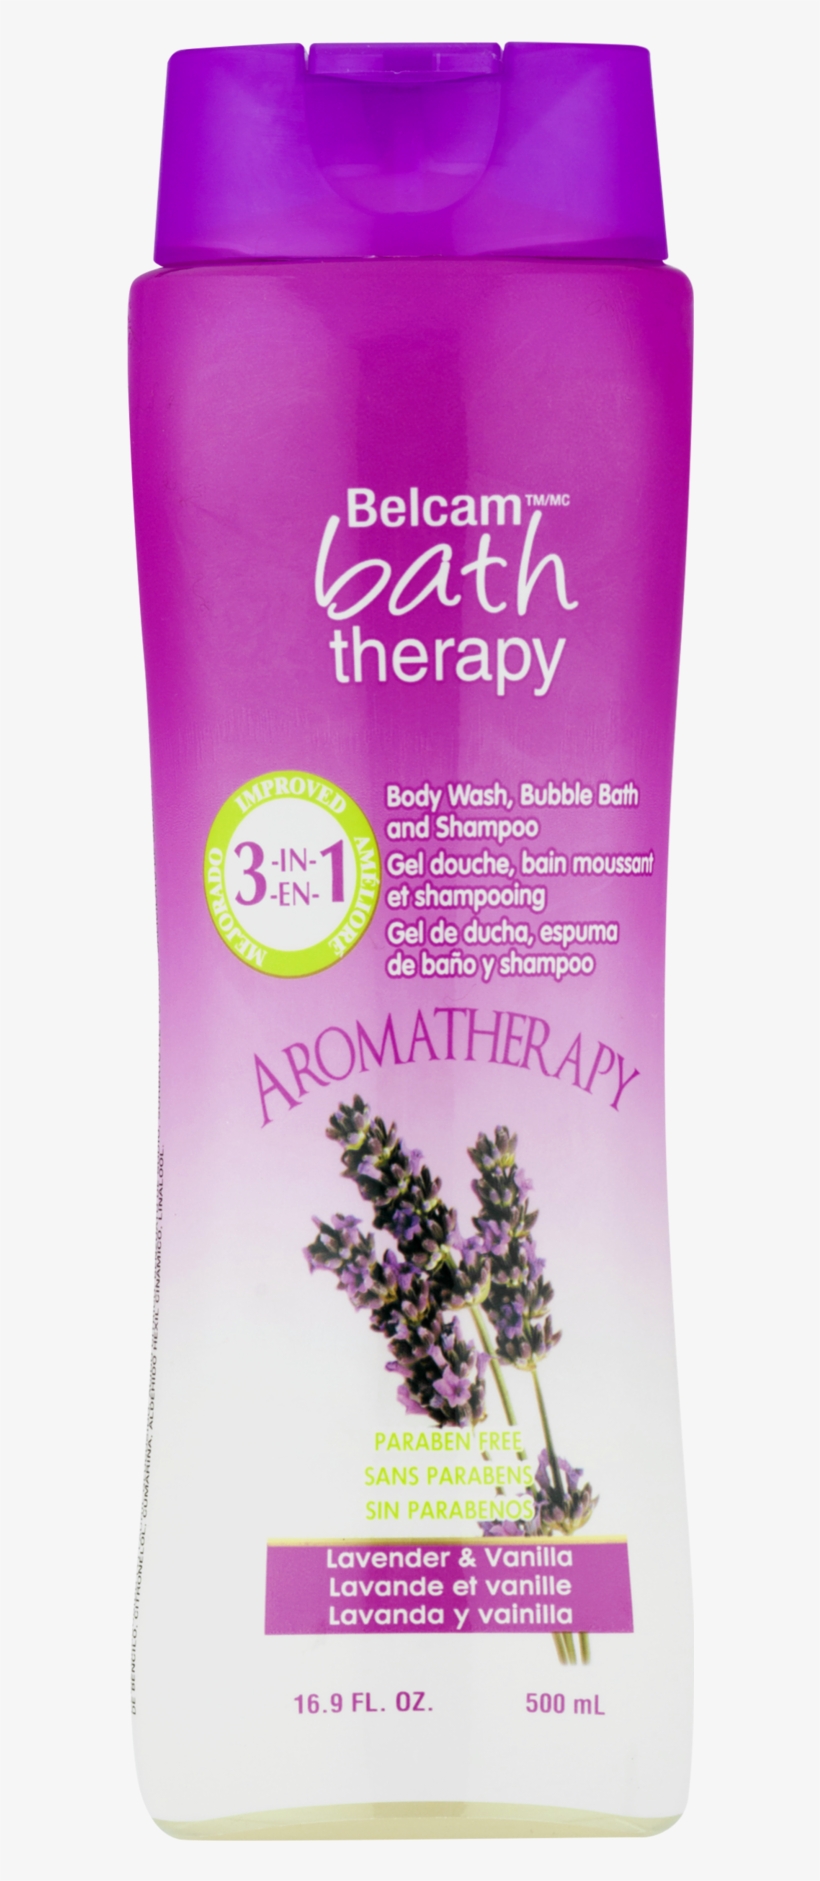 Belcam Aromatherapy Body Wash, Bubble Bath And Shampoo - Bottle, transparent png #8124704